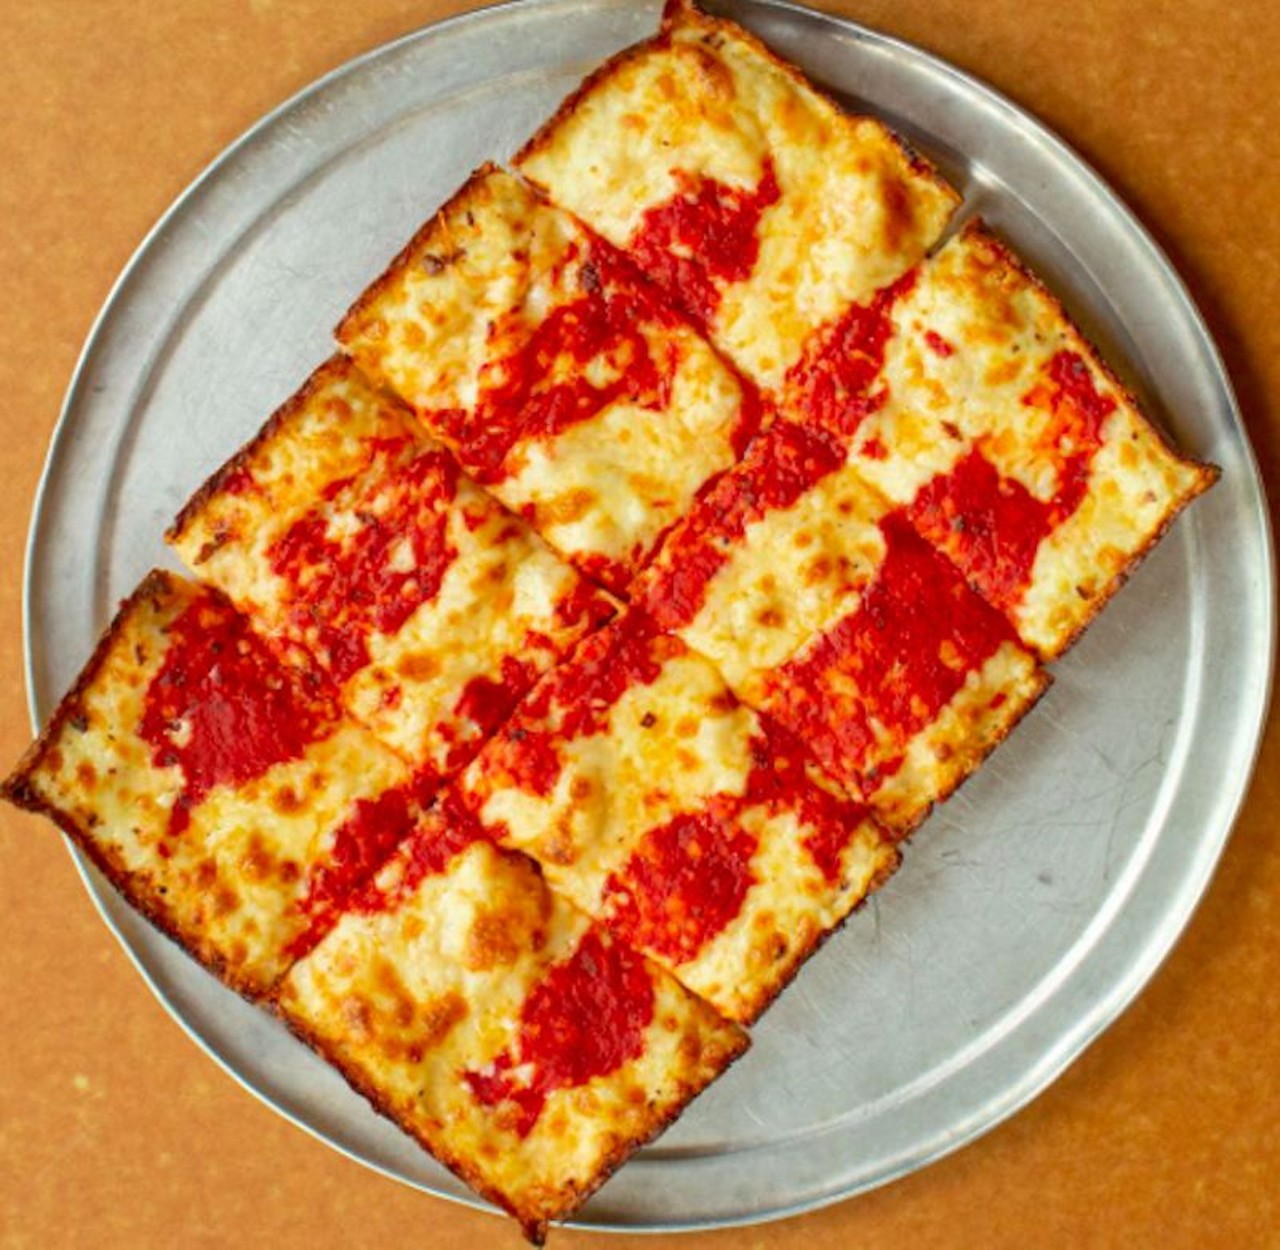 https://media1.metrotimes.com/metrotimes/imager/essential-detroit-area-pizza-restaurants-everyone-should-try-at-least-once/u/zoom/29113431/buddy_s.jpg?cb=1682103191